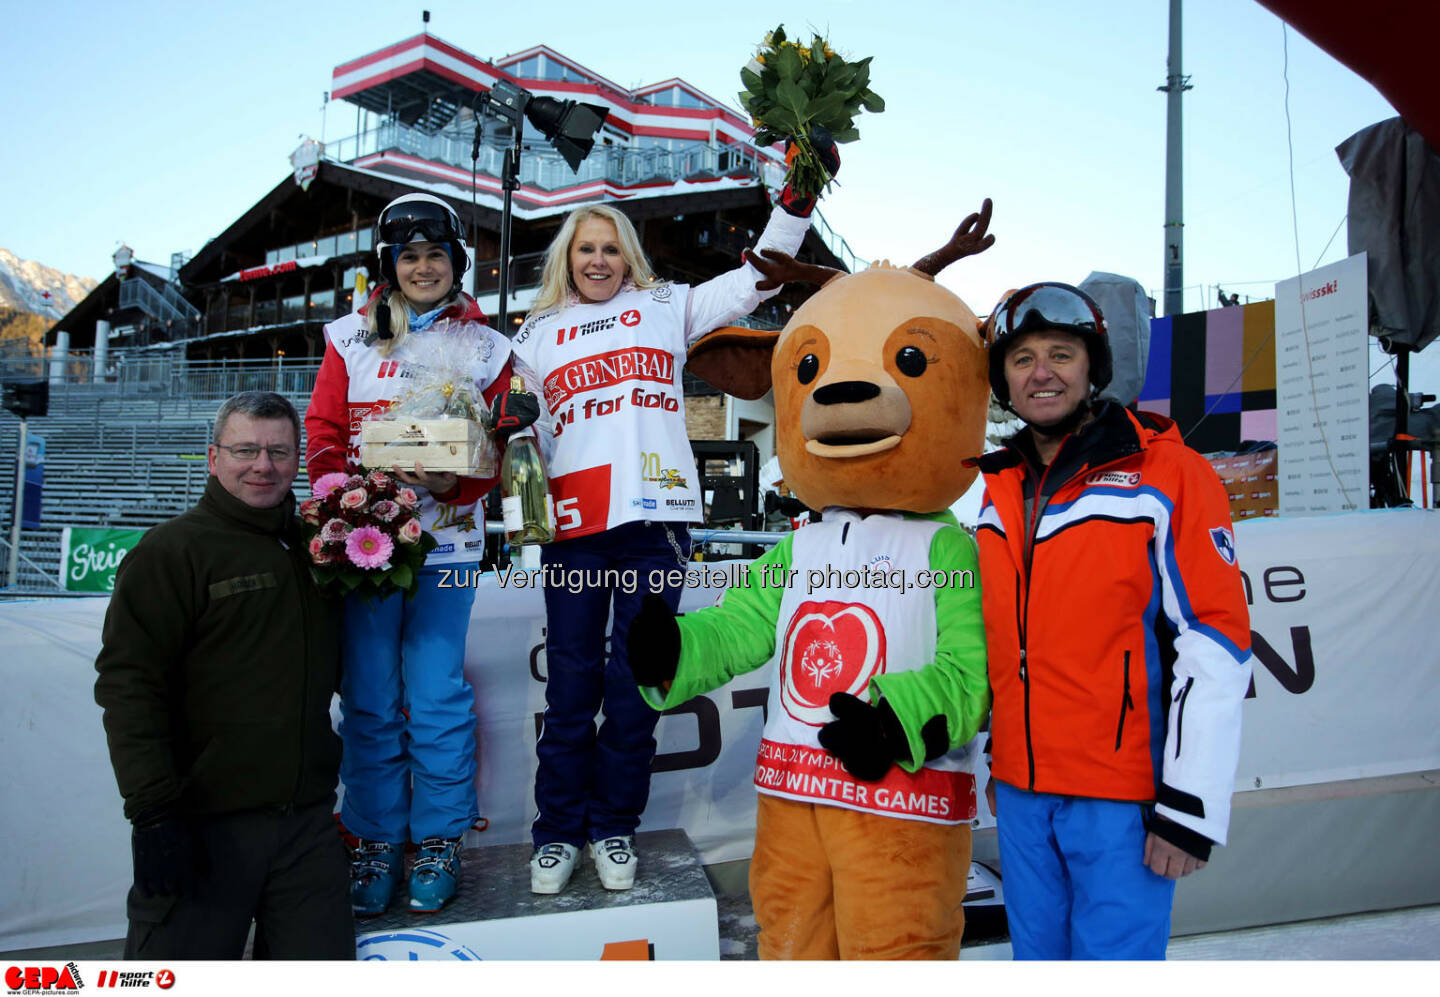 Ski for Gold Charity Race. Image shows Simone Gruber-Hofer, Ulrike Kriegler, managing director Harald Bauer (Sporthilfe) and maskot Luis. Keywords: Special Olympics World Winter Games, SOWWG Austria 2017 preview. Photo: GEPA pictures/ Daniel Goetzhaber